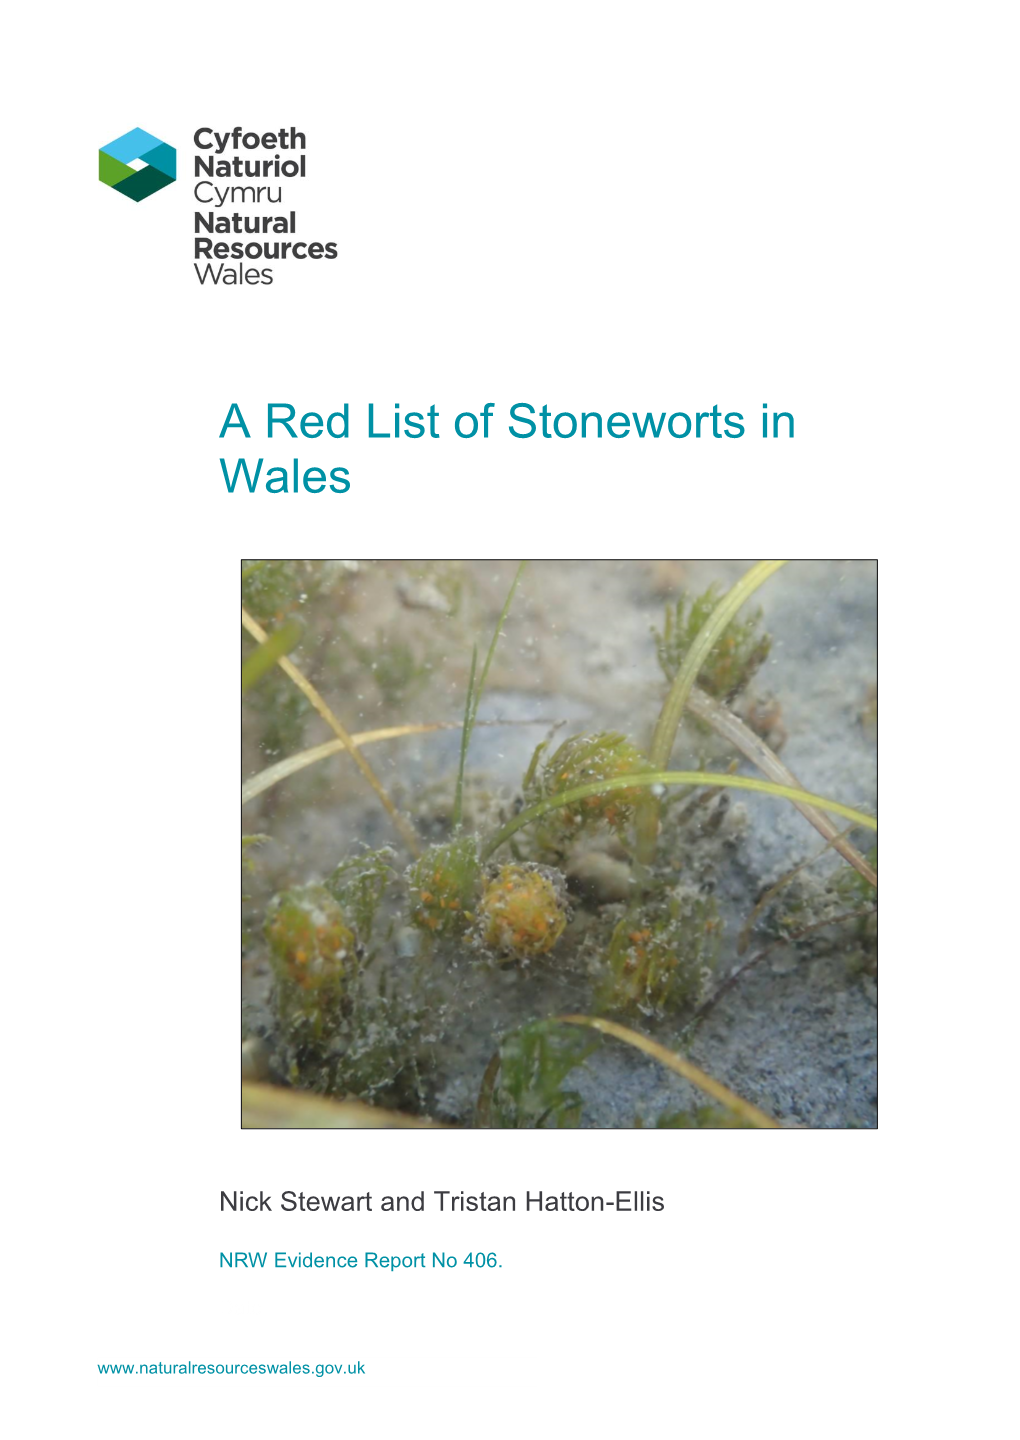 A Red List of Stoneworts in Wales